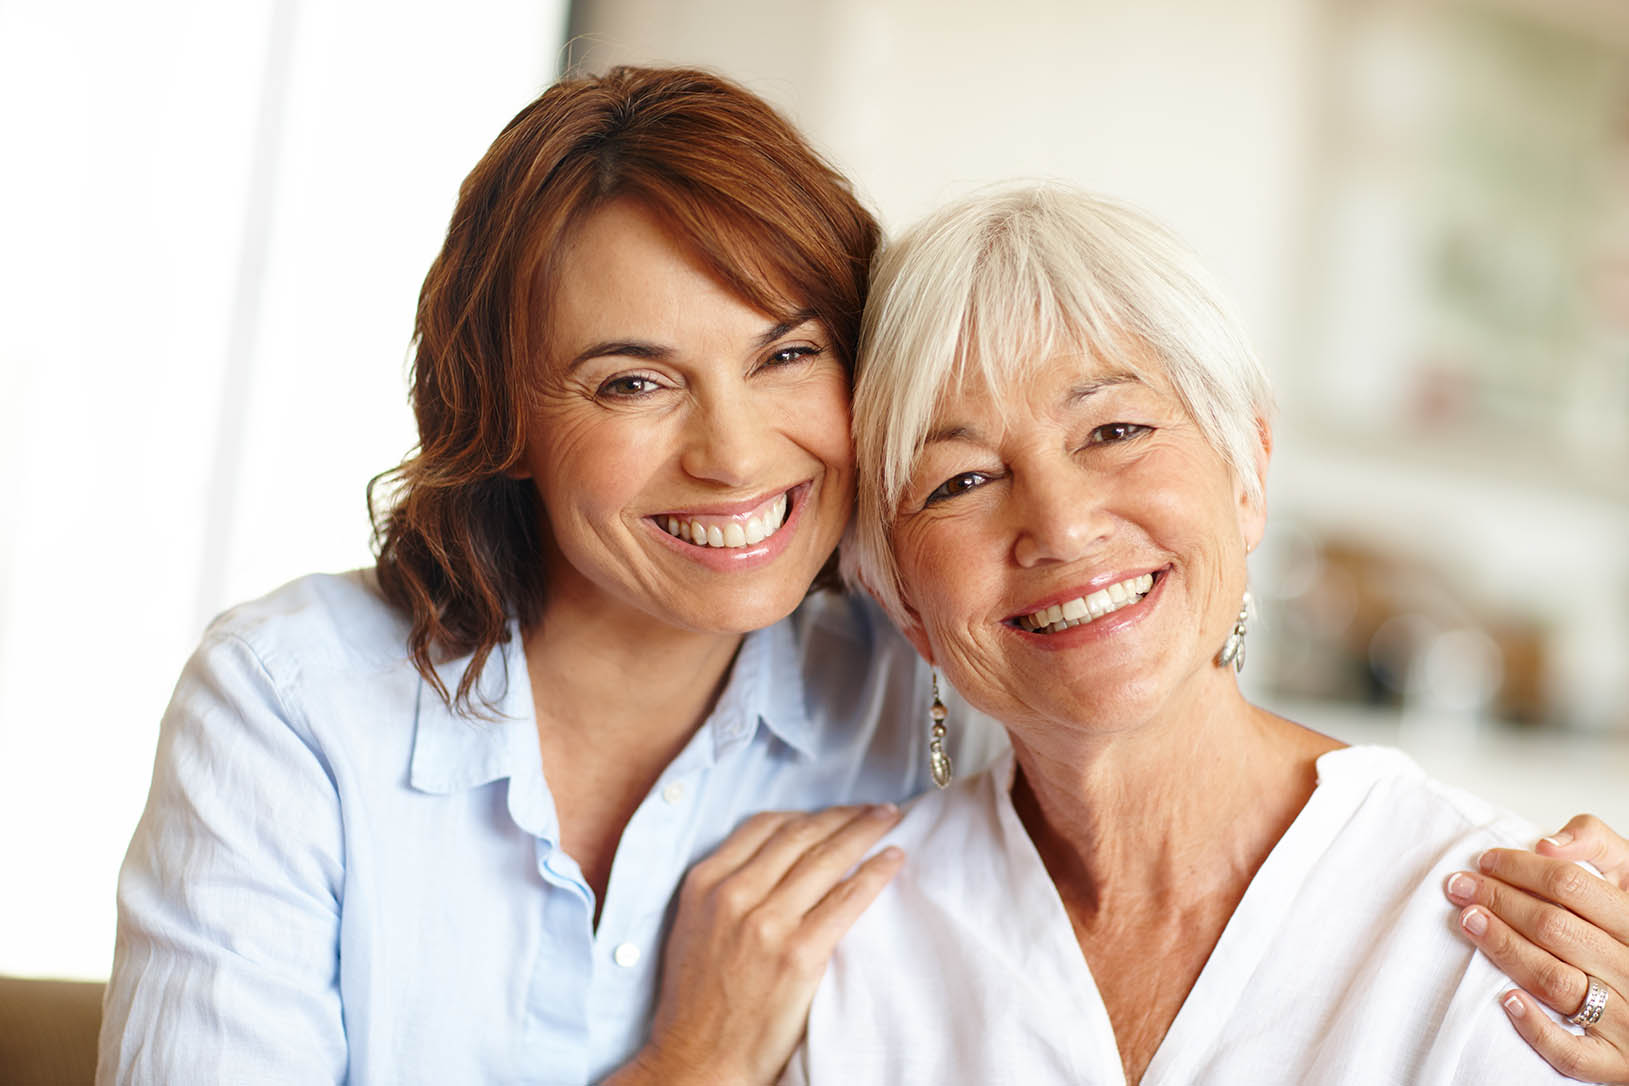 Portrait of a woman spending time with her elderly mother